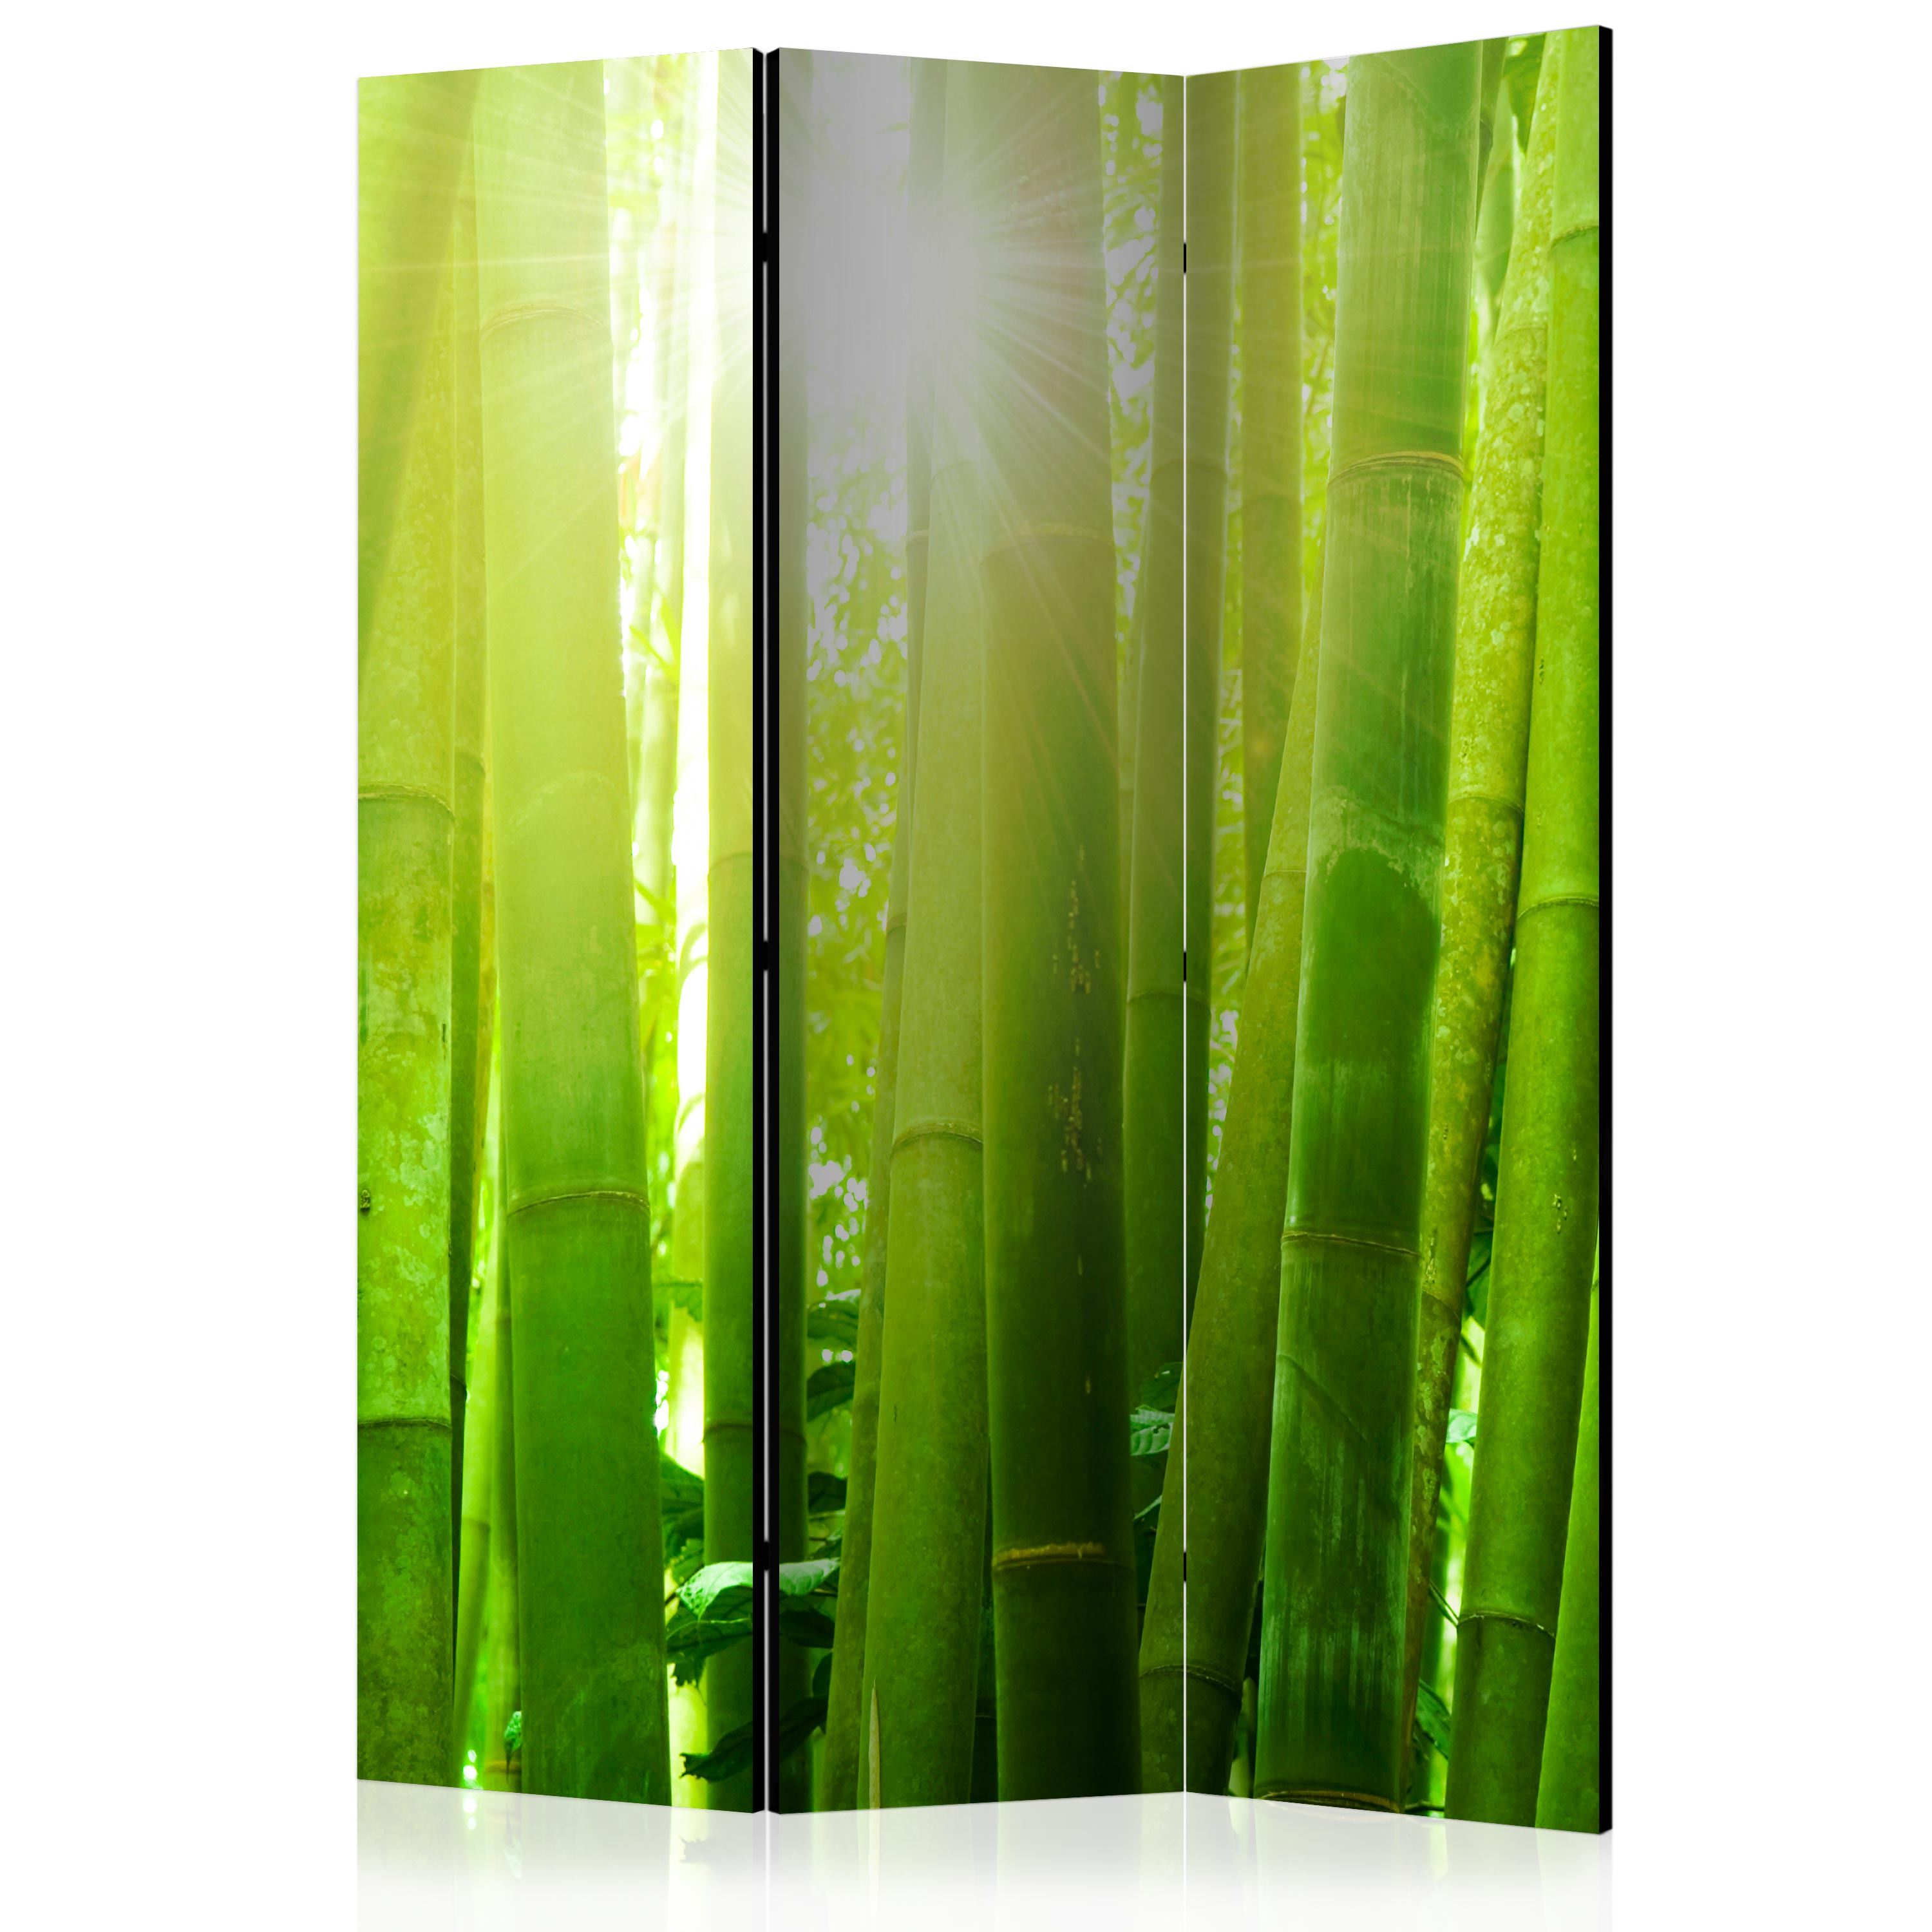 Room Divider - Sun and bamboo [Room Dividers] - 135x172